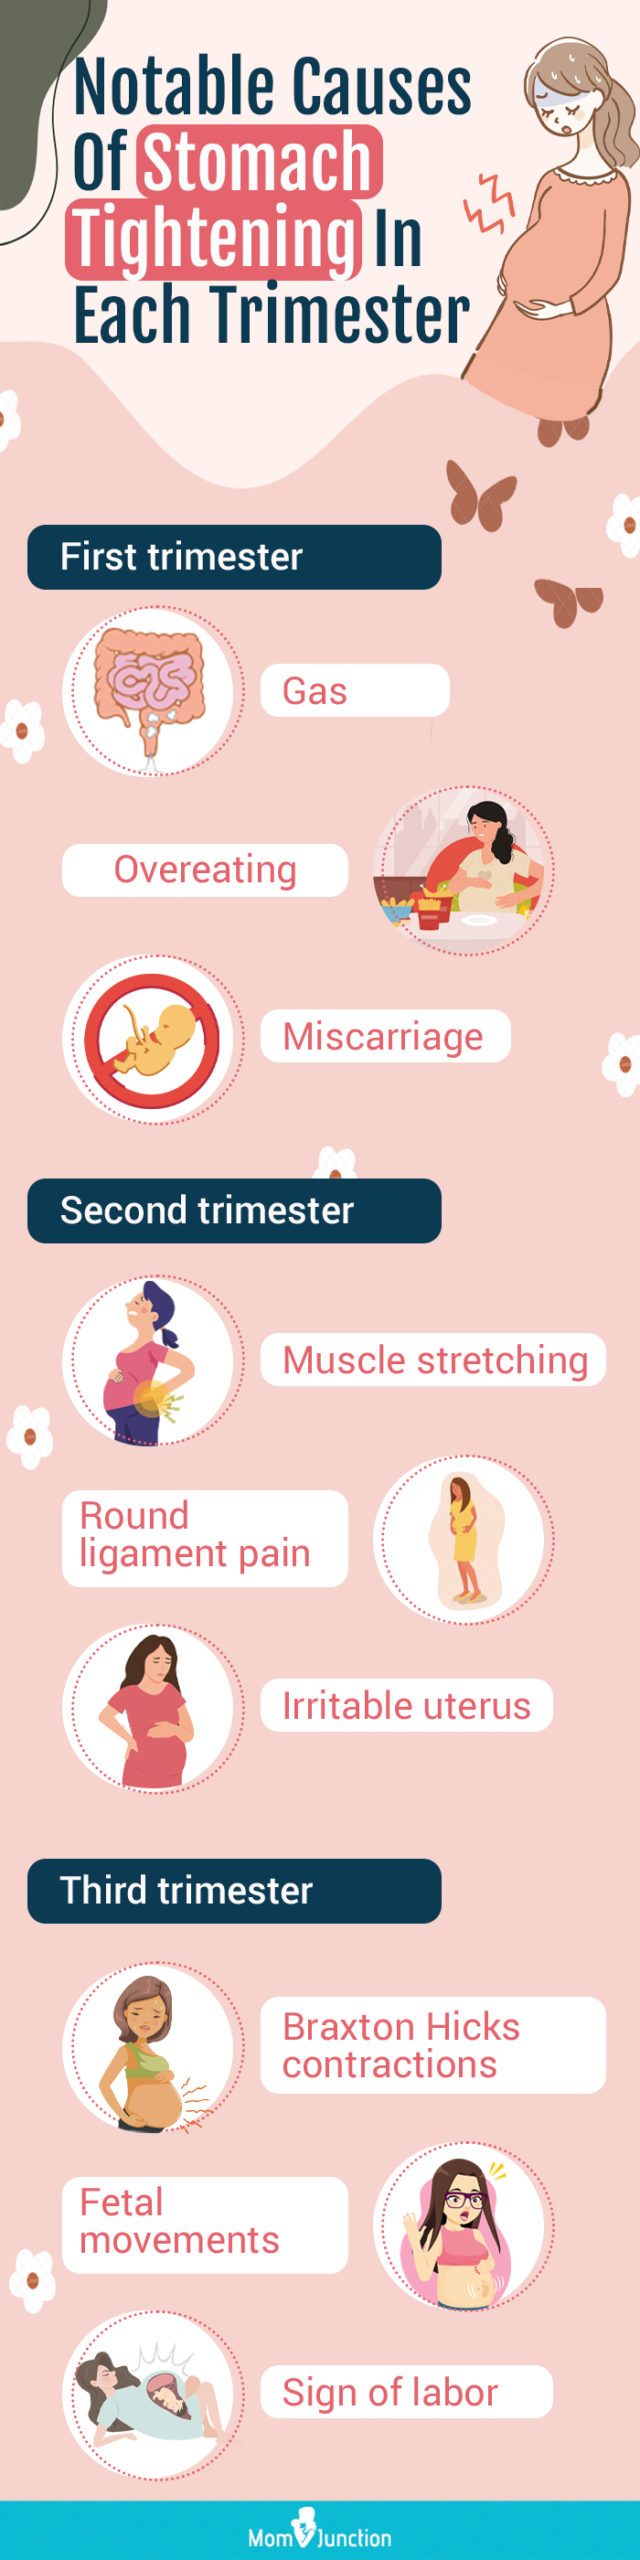 notable causes of stomach tightening in each trimester [infographic]